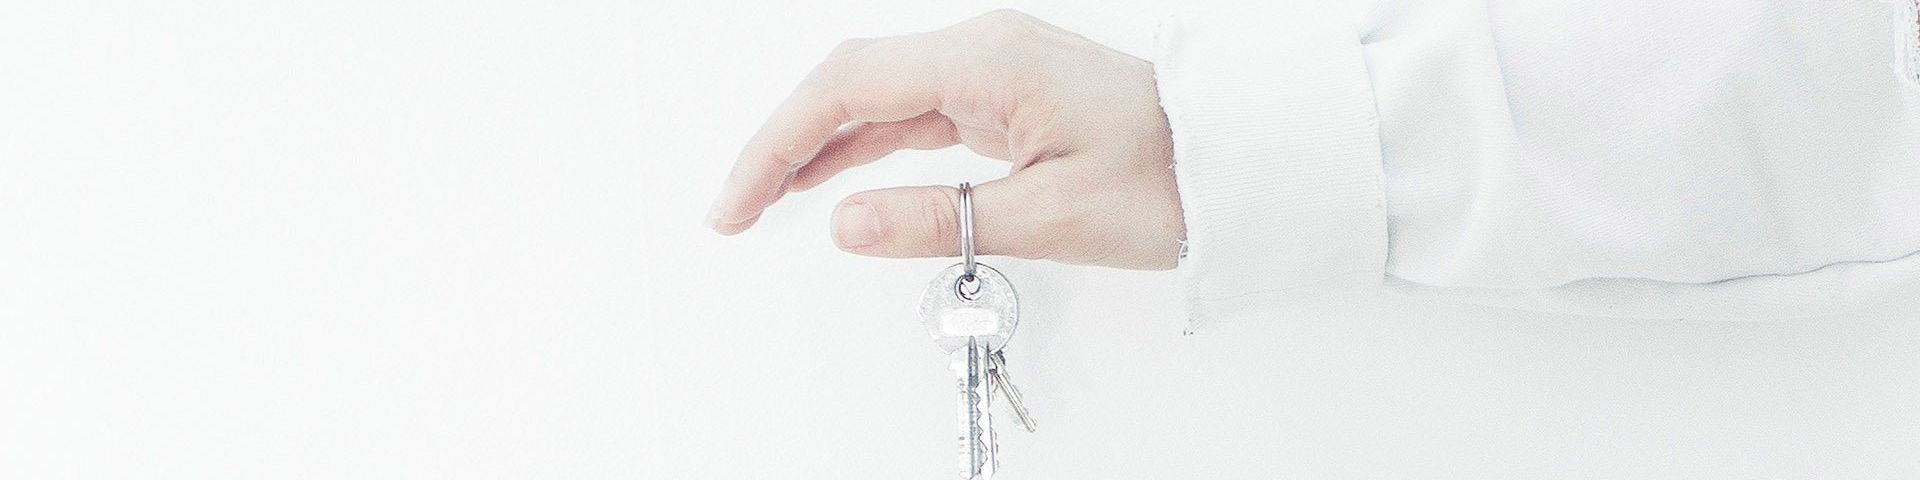 An outstretched arm and hand, dangling a set of keys from the thumb.